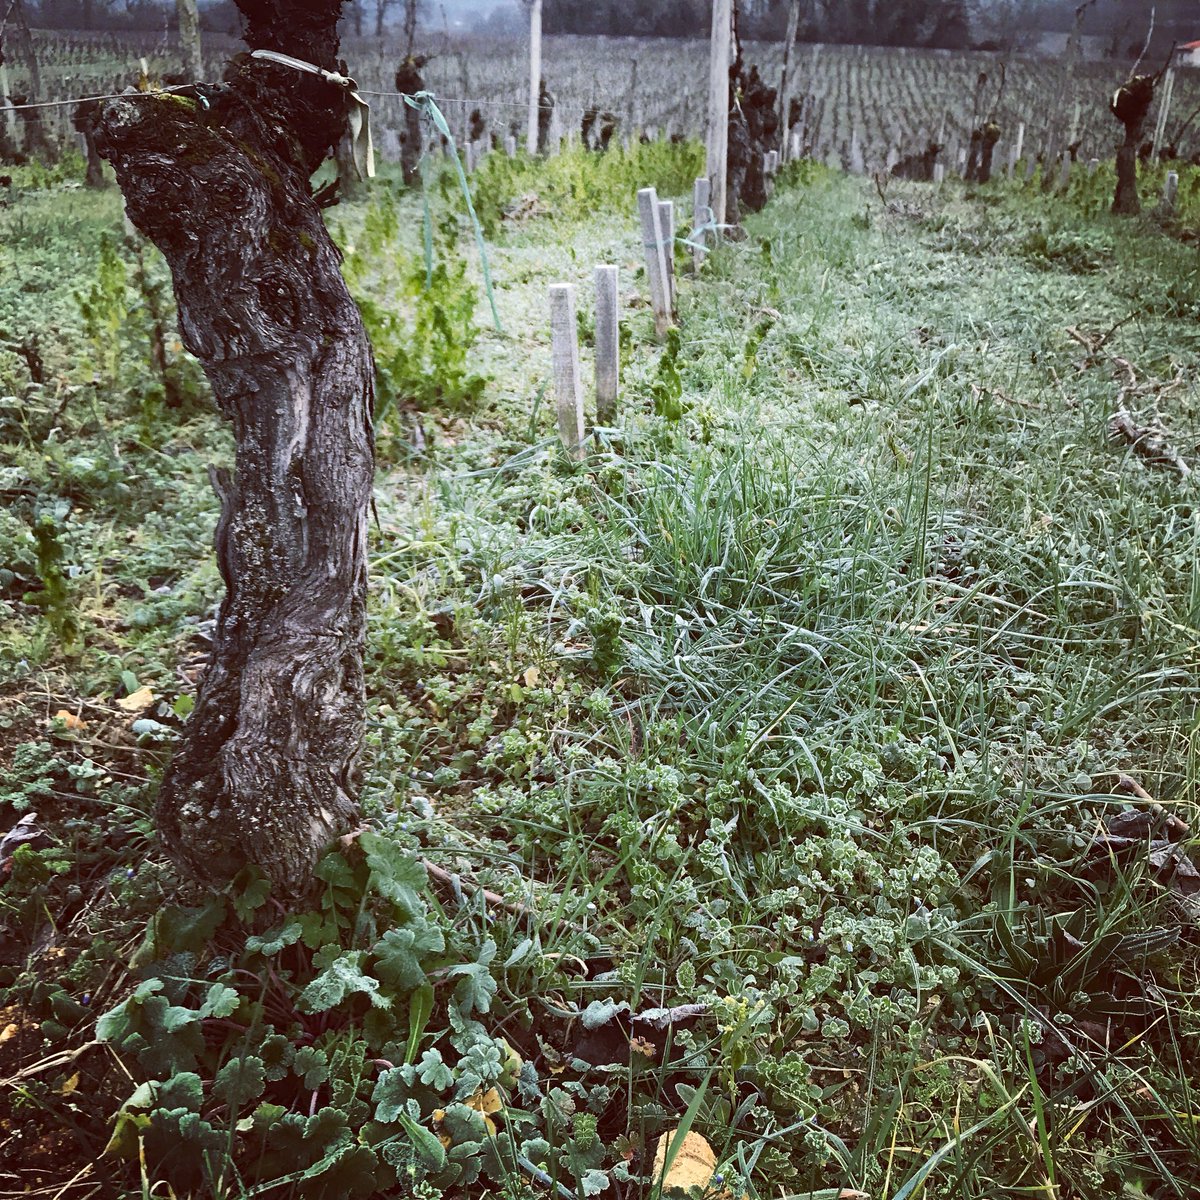 Frosty in #lafauconnerie vineyard this morning #dormantvines @bordeauxwines #thewinebuff